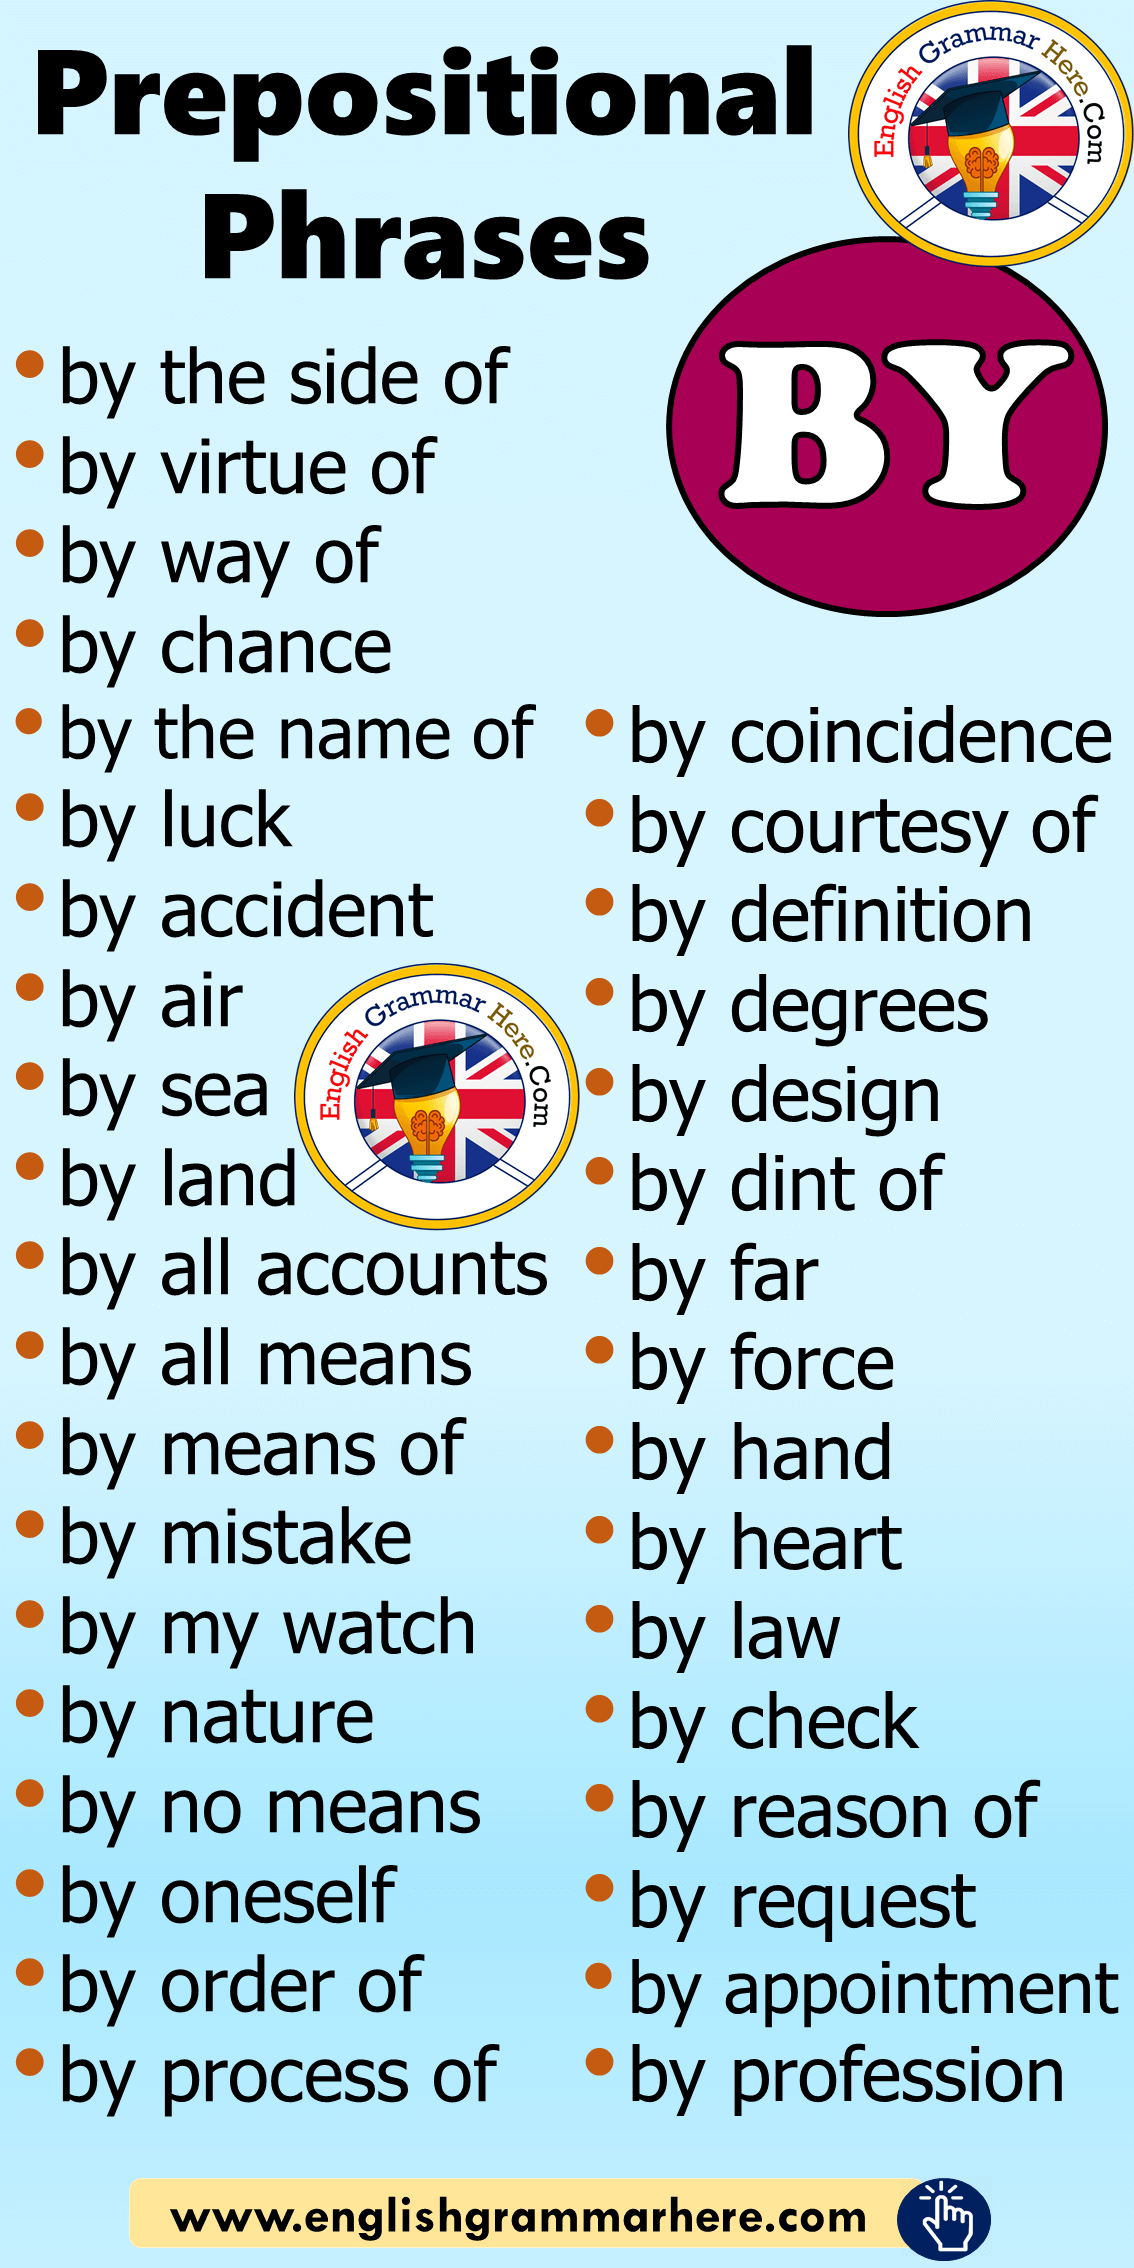 English Prepositional Phrases BY List, Example Phrases